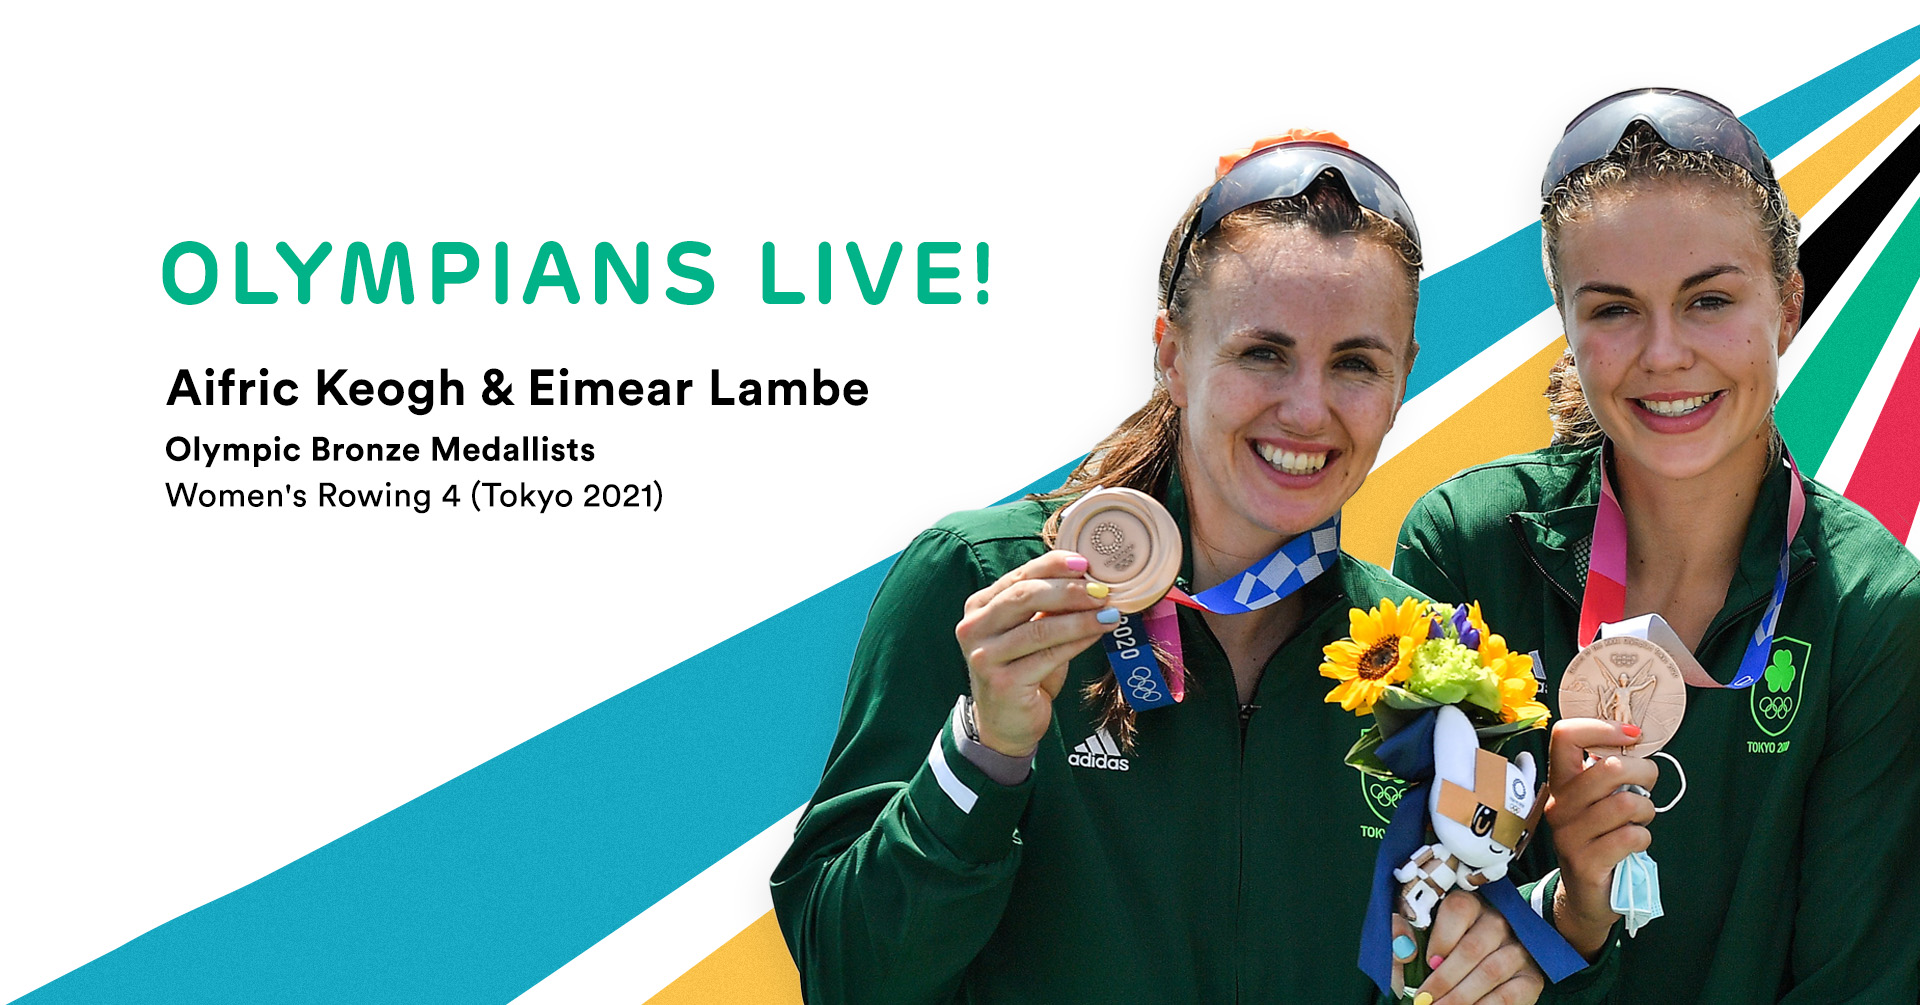 Olympians LIVE! Webinar with Olympic Medallists on Nov 16th